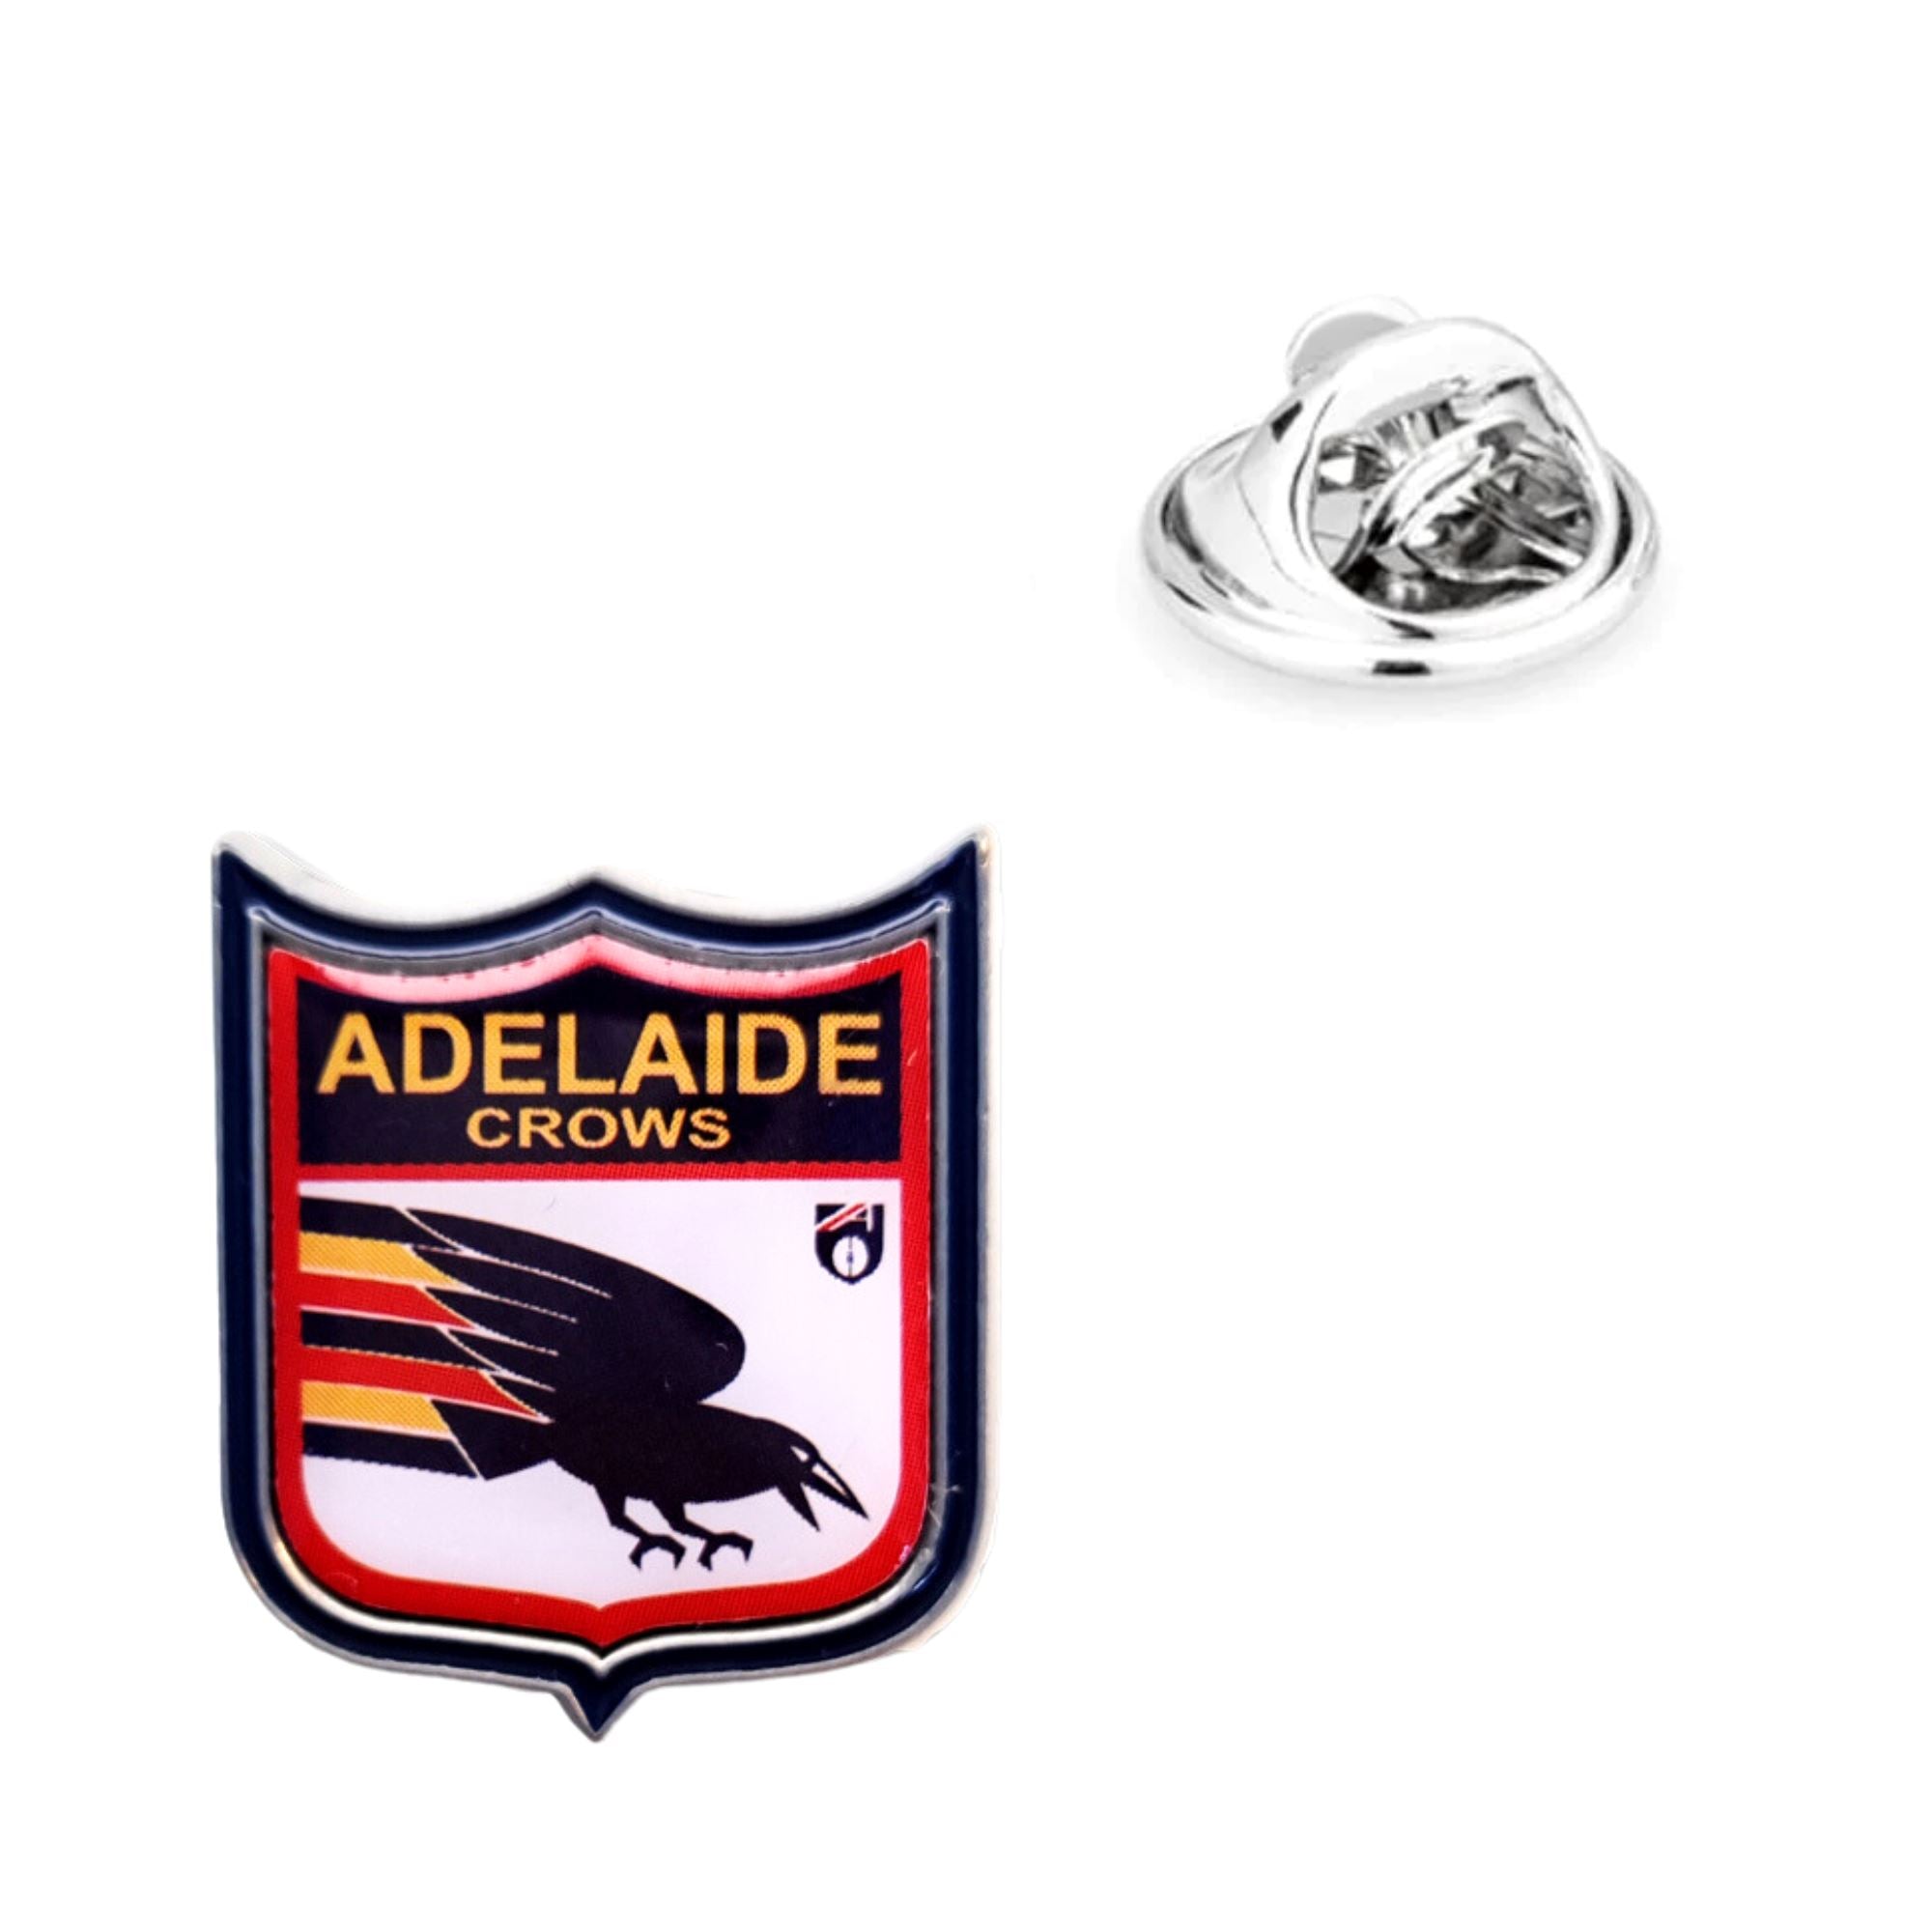 Adelaide Crows AFL Heritage Pin Lapel Pin Clinks 